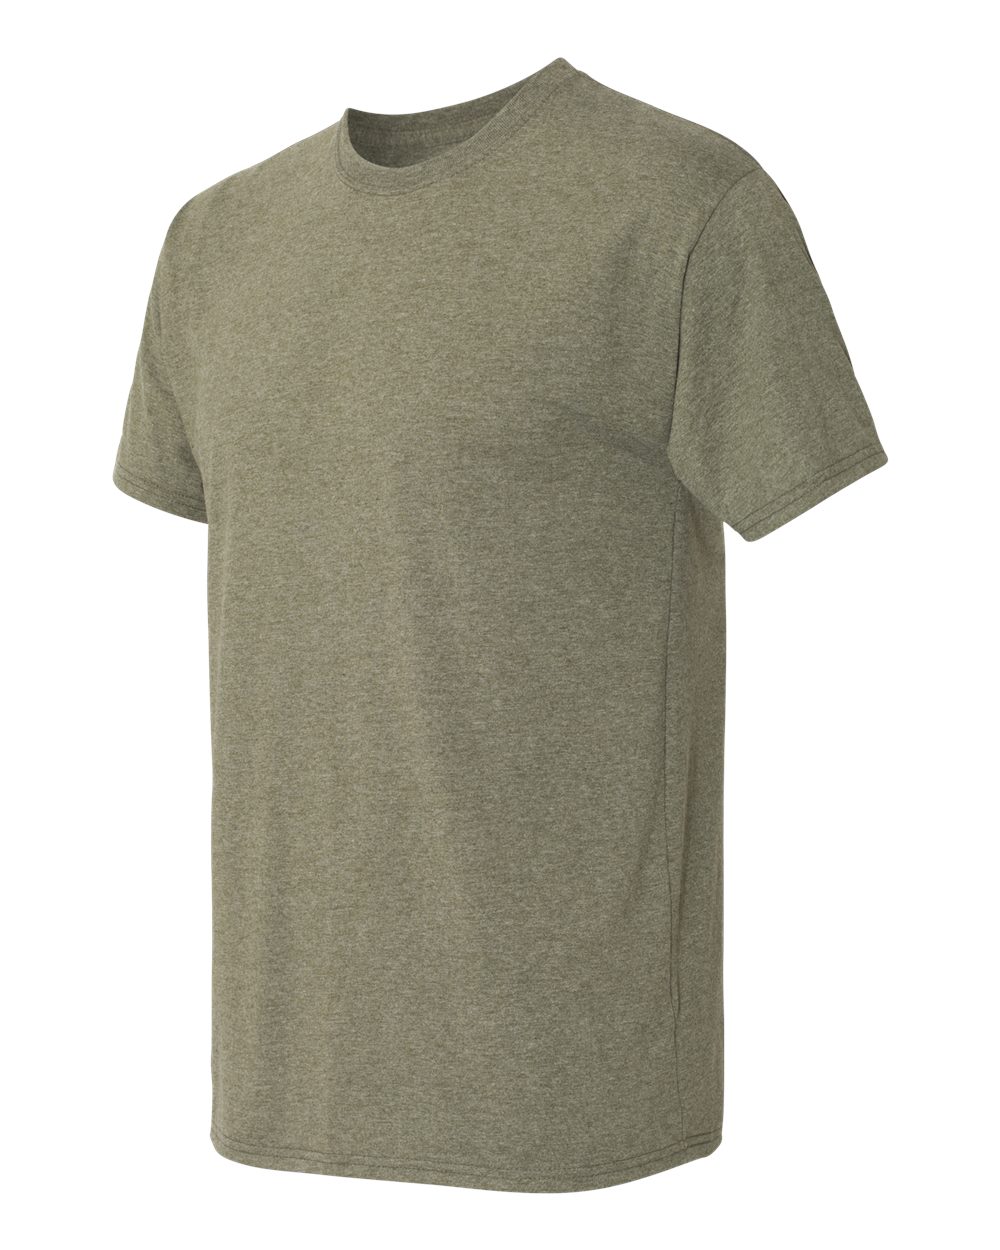 click to view Military Green Triblend